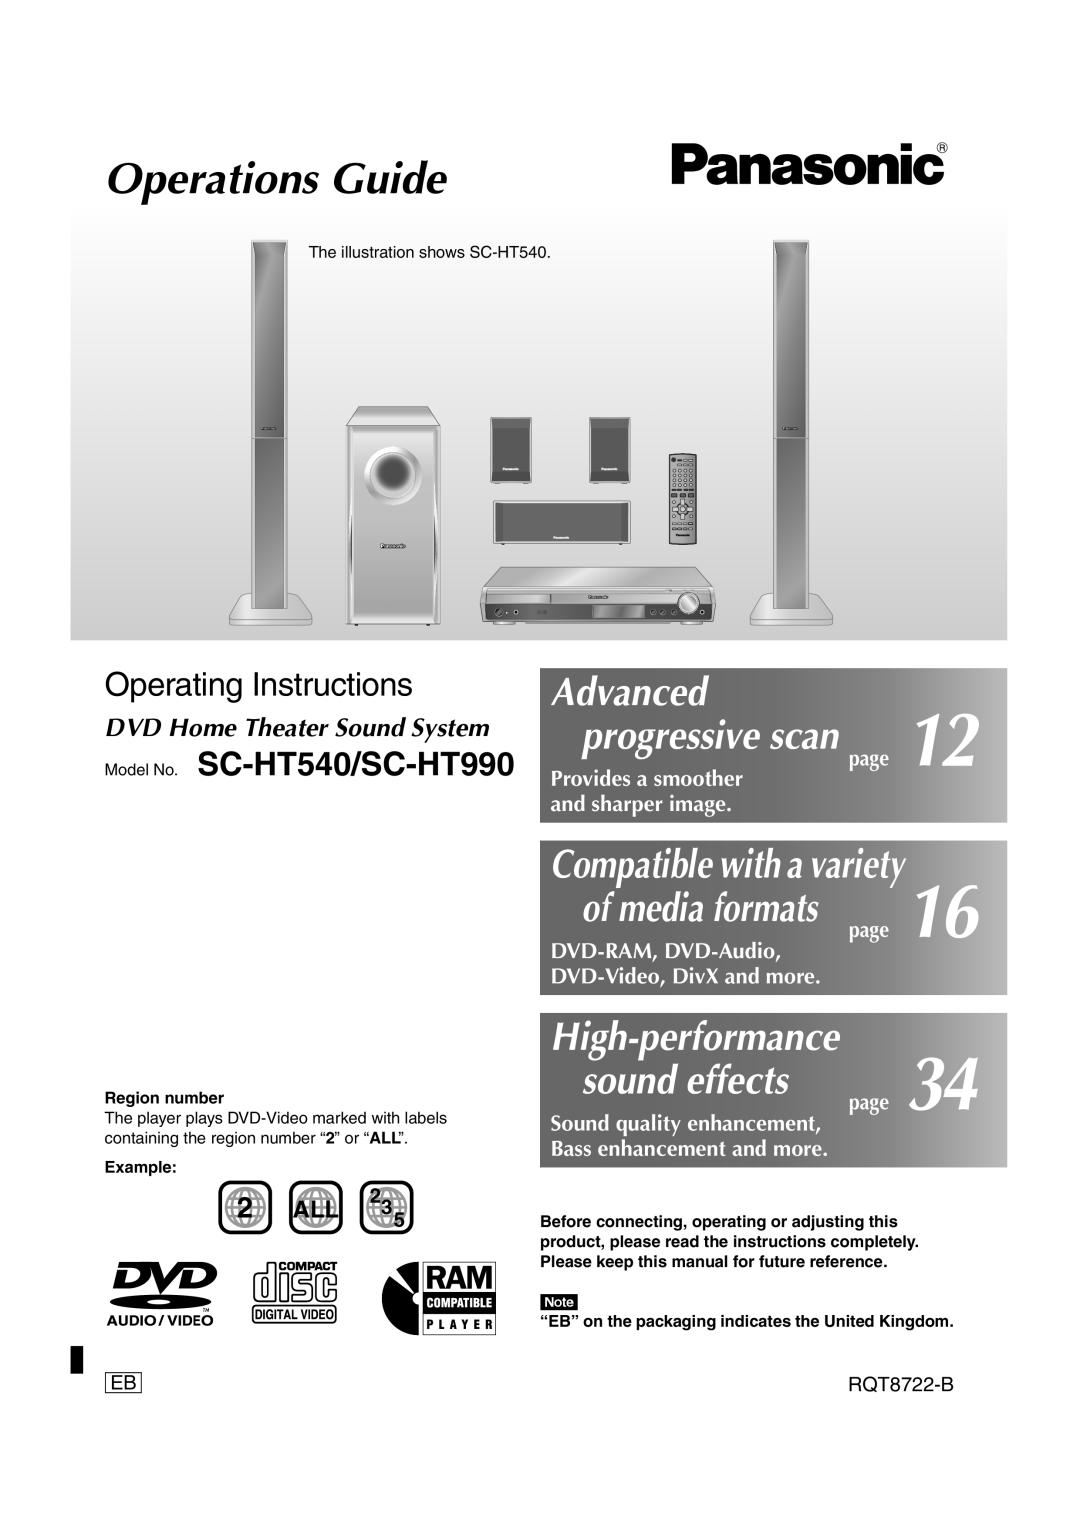 Panasonic SC-HT990 operating instructions 2 ALL, page, DVD-RAM, DVD-Audio, DVD-Video,DivX and more, Operations Guide 